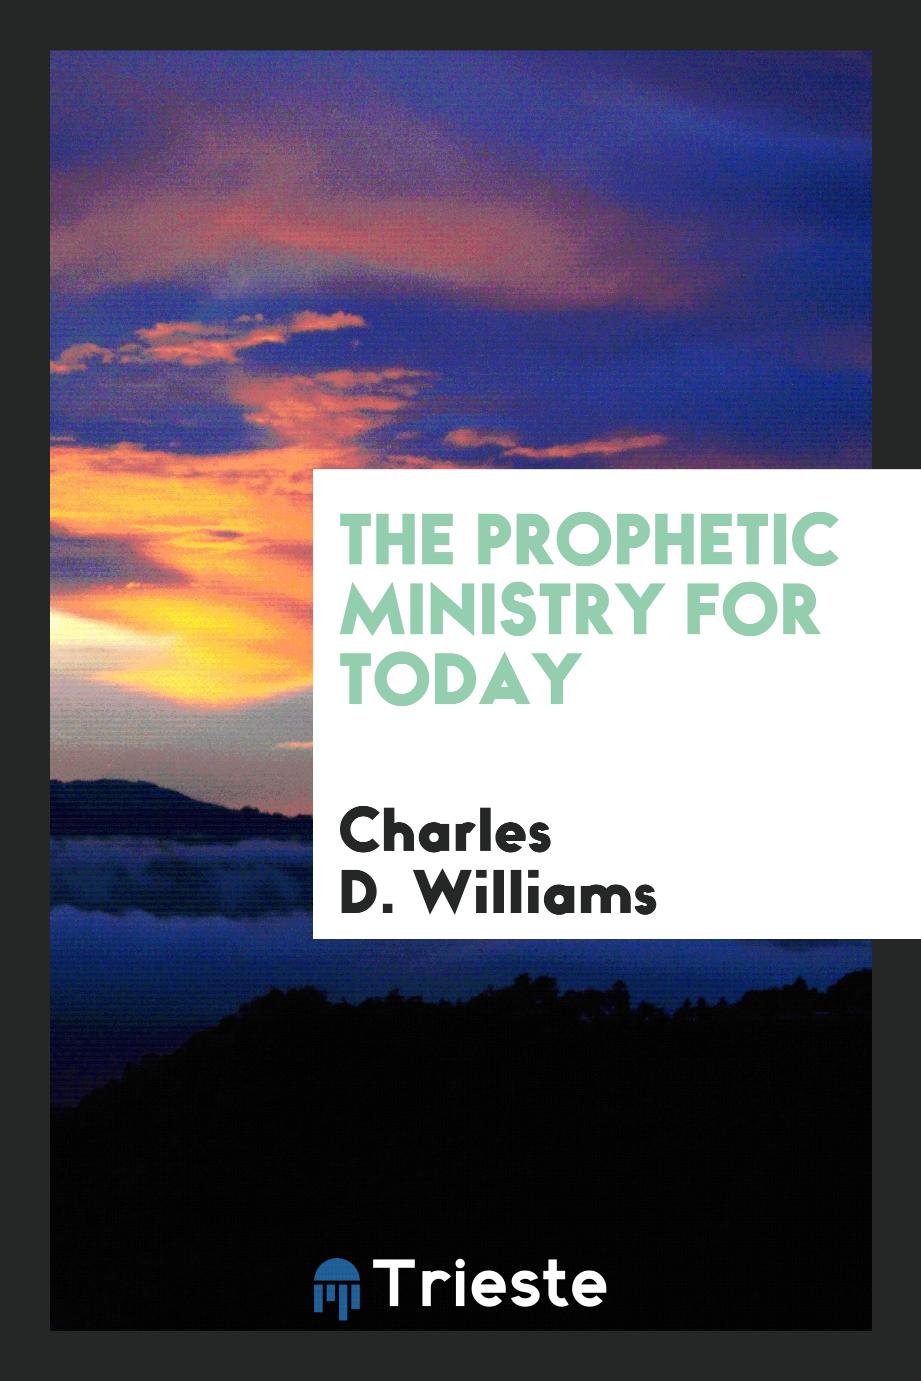 The prophetic ministry for today